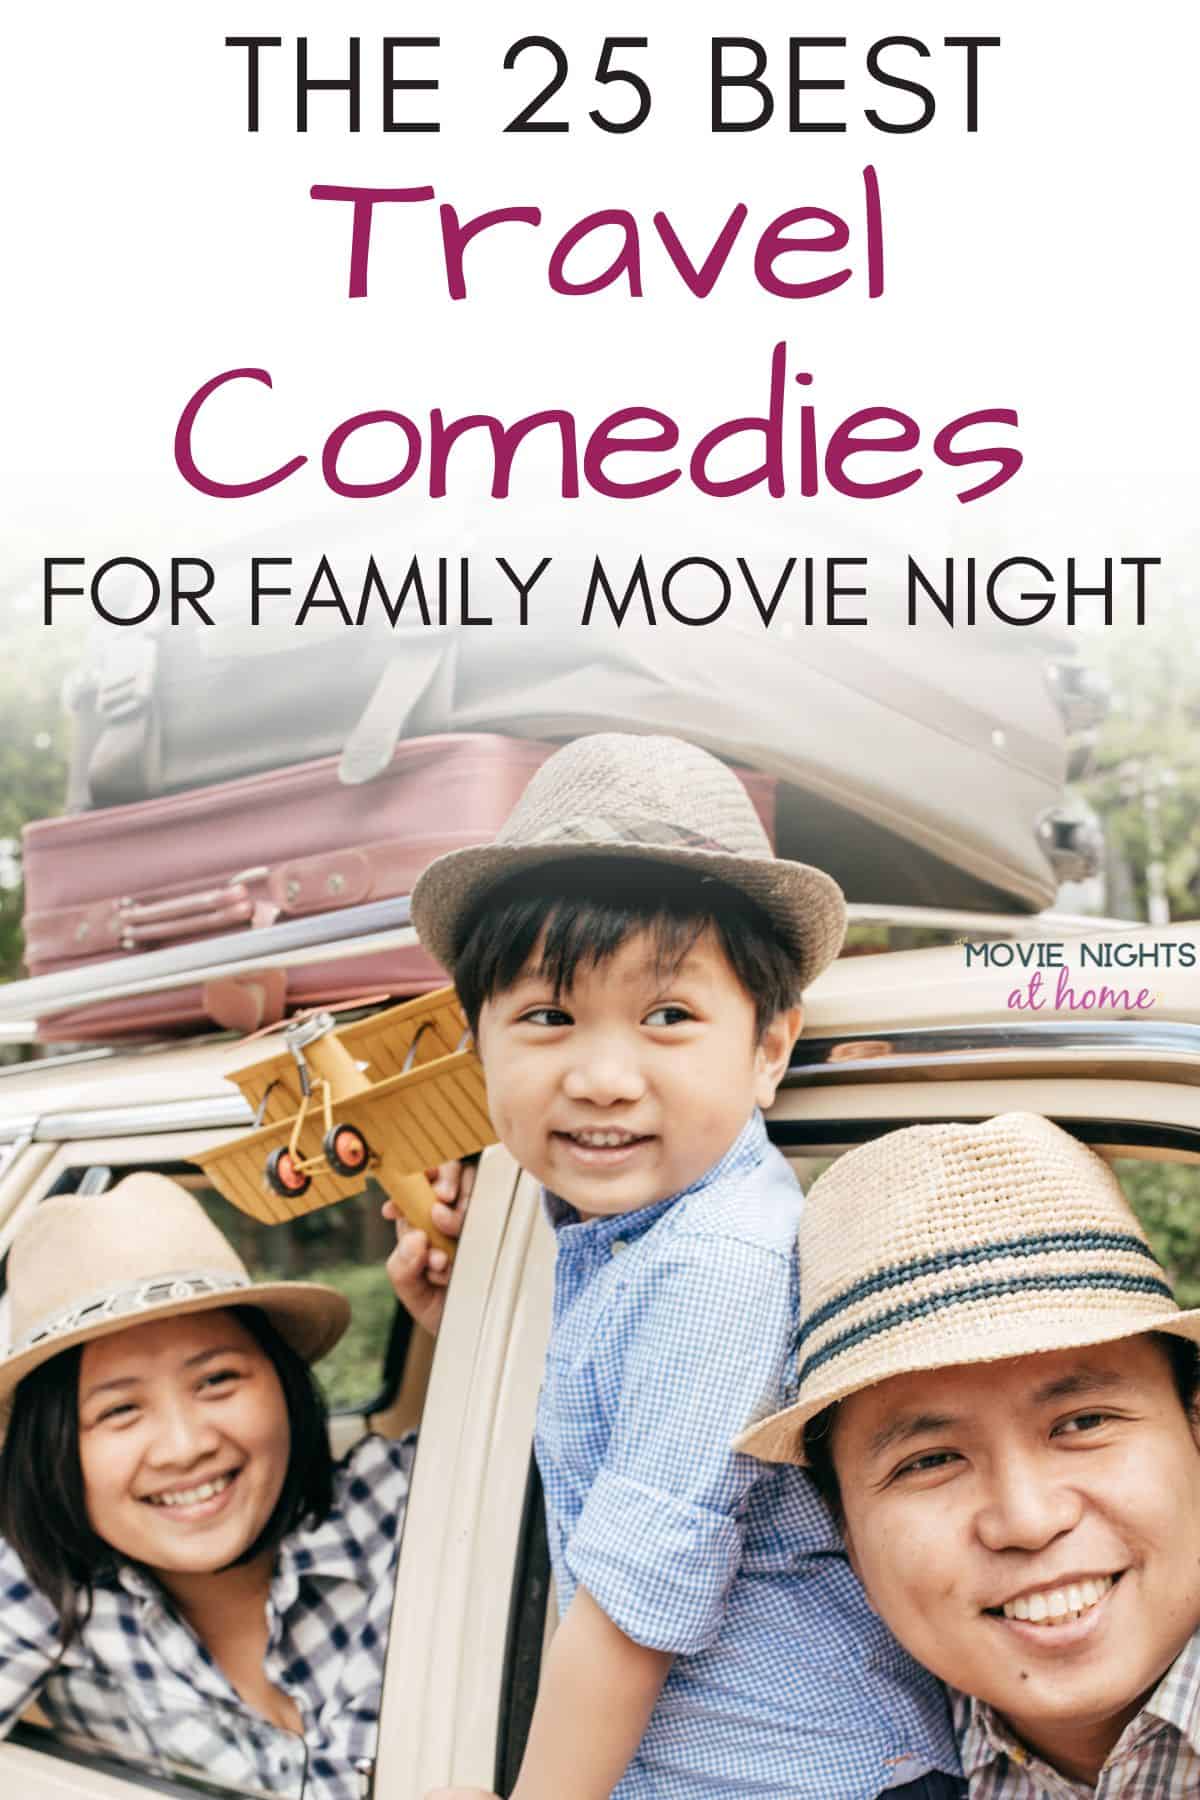 25 Comedy Travel Movies for Family Movie Night